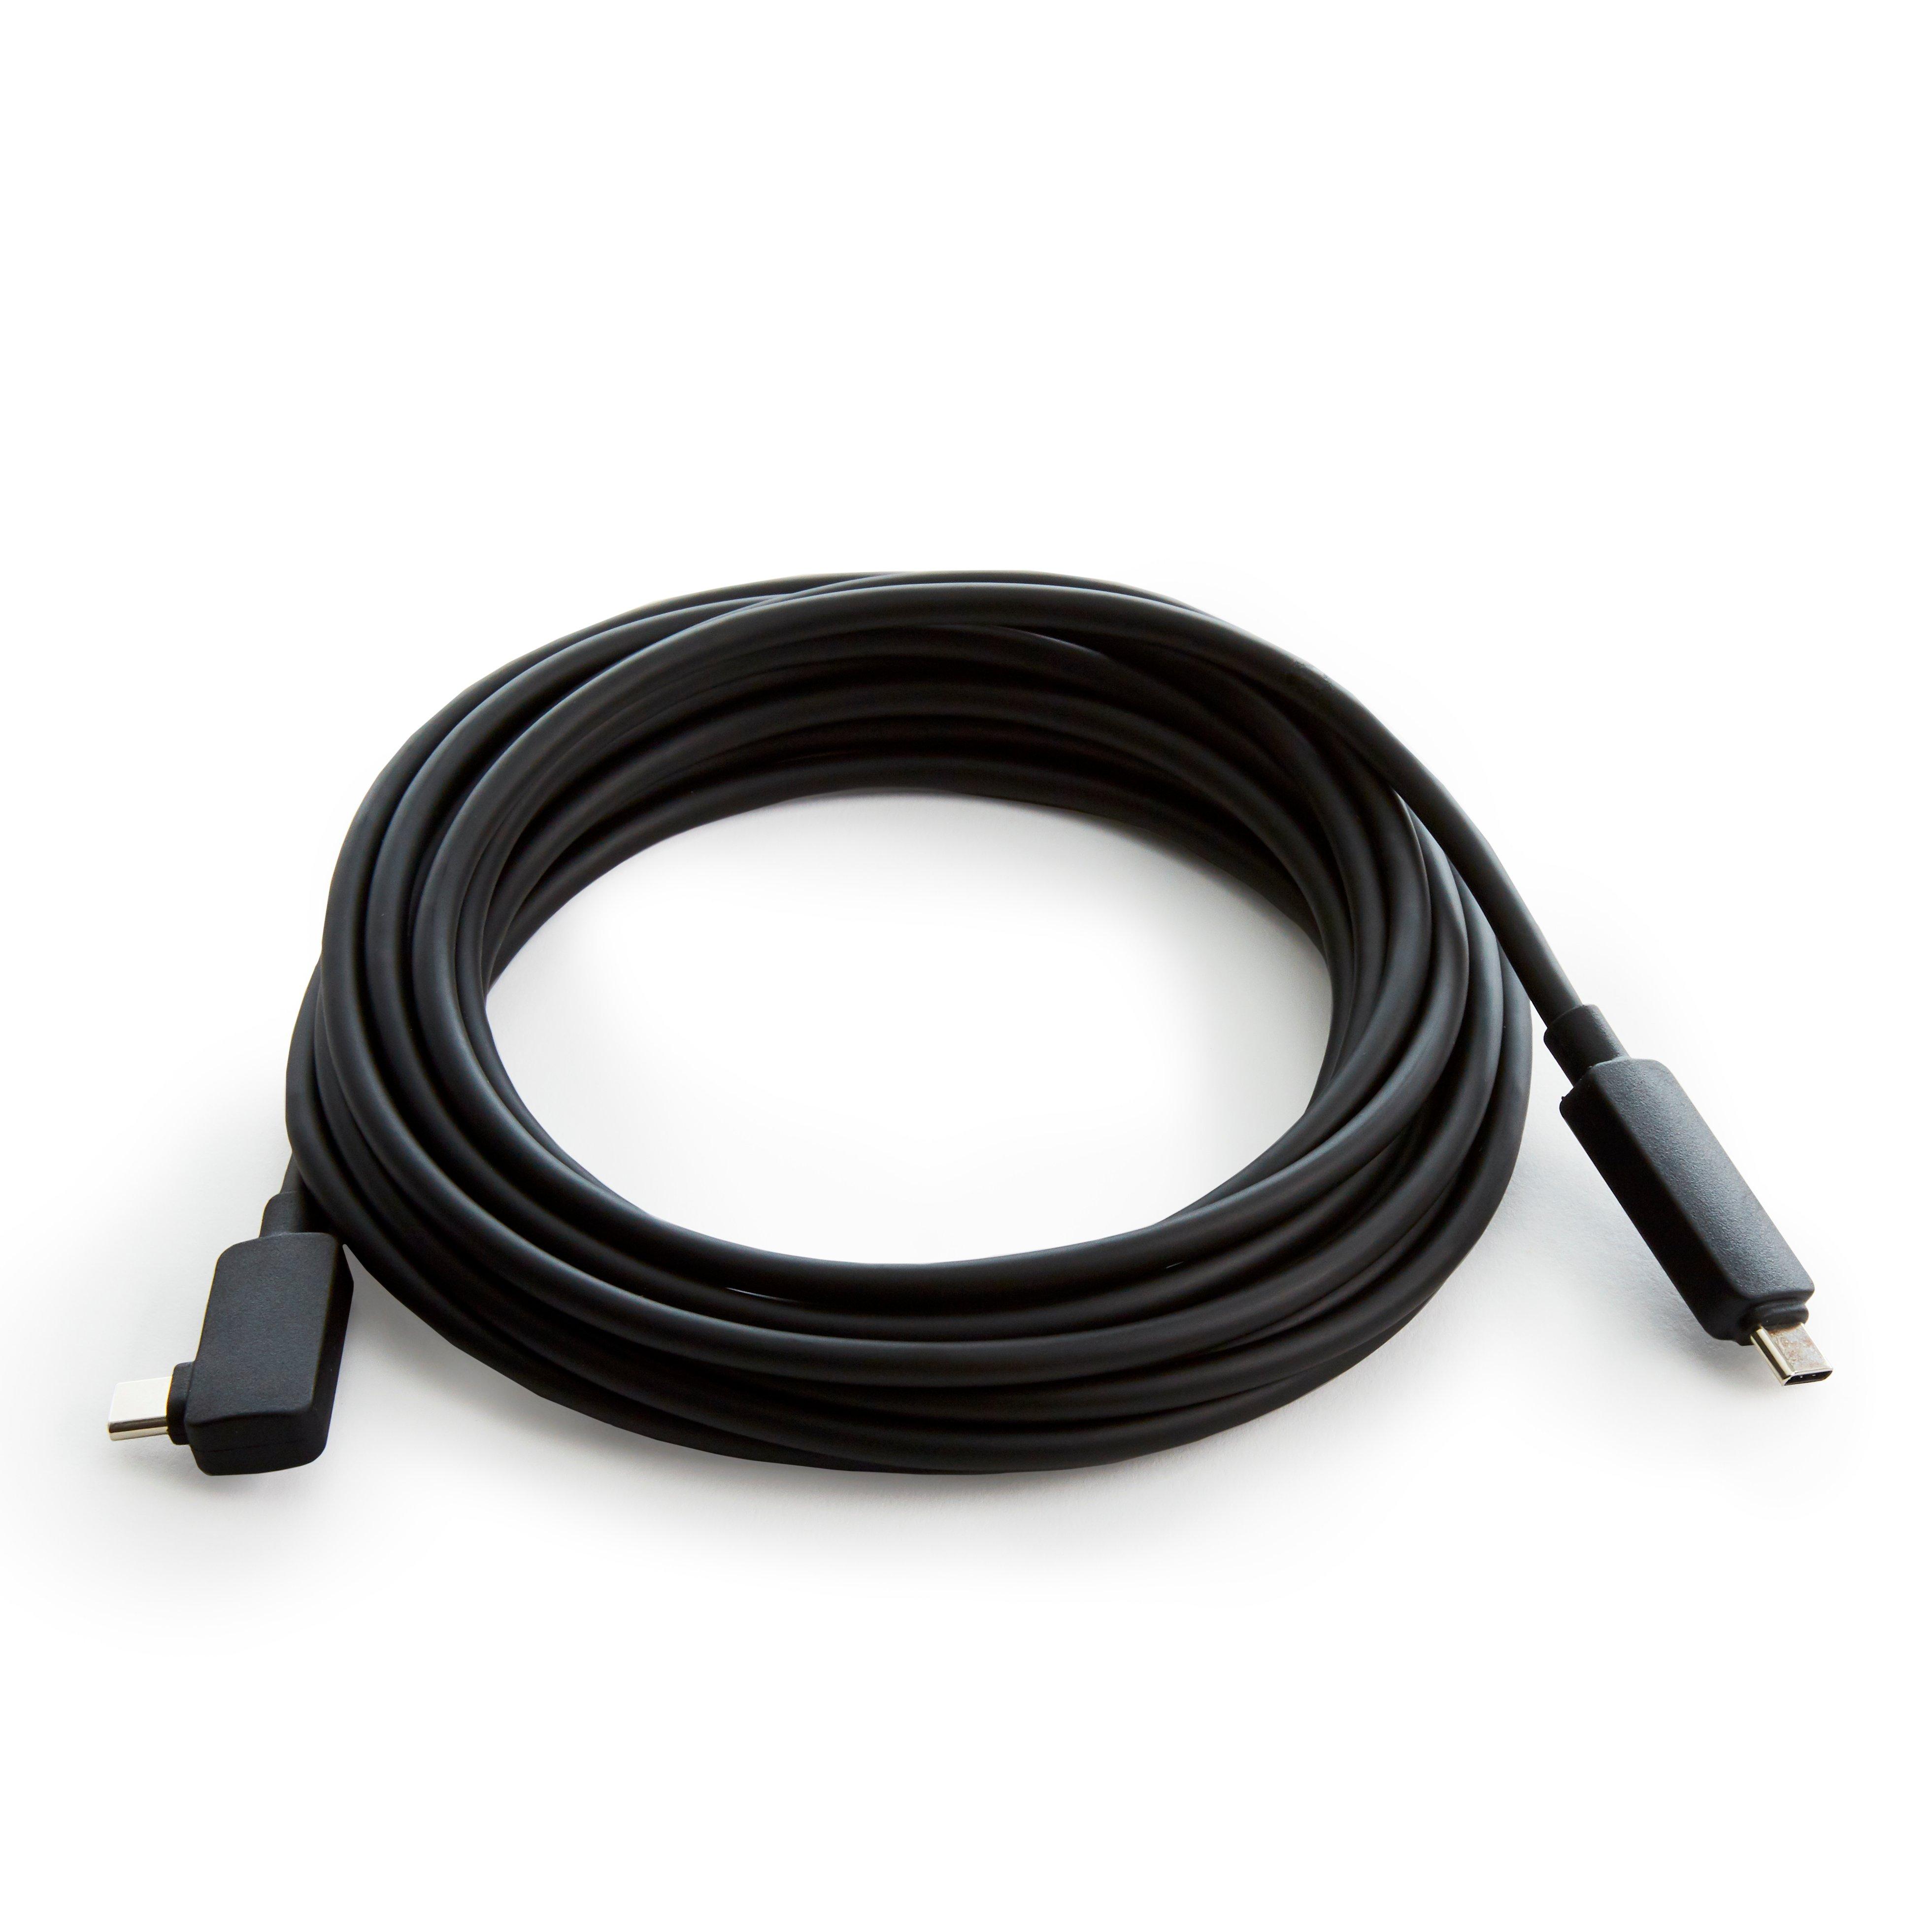 Oculus Link - Virtual Reality Headset Cable - USB-C to USB-C